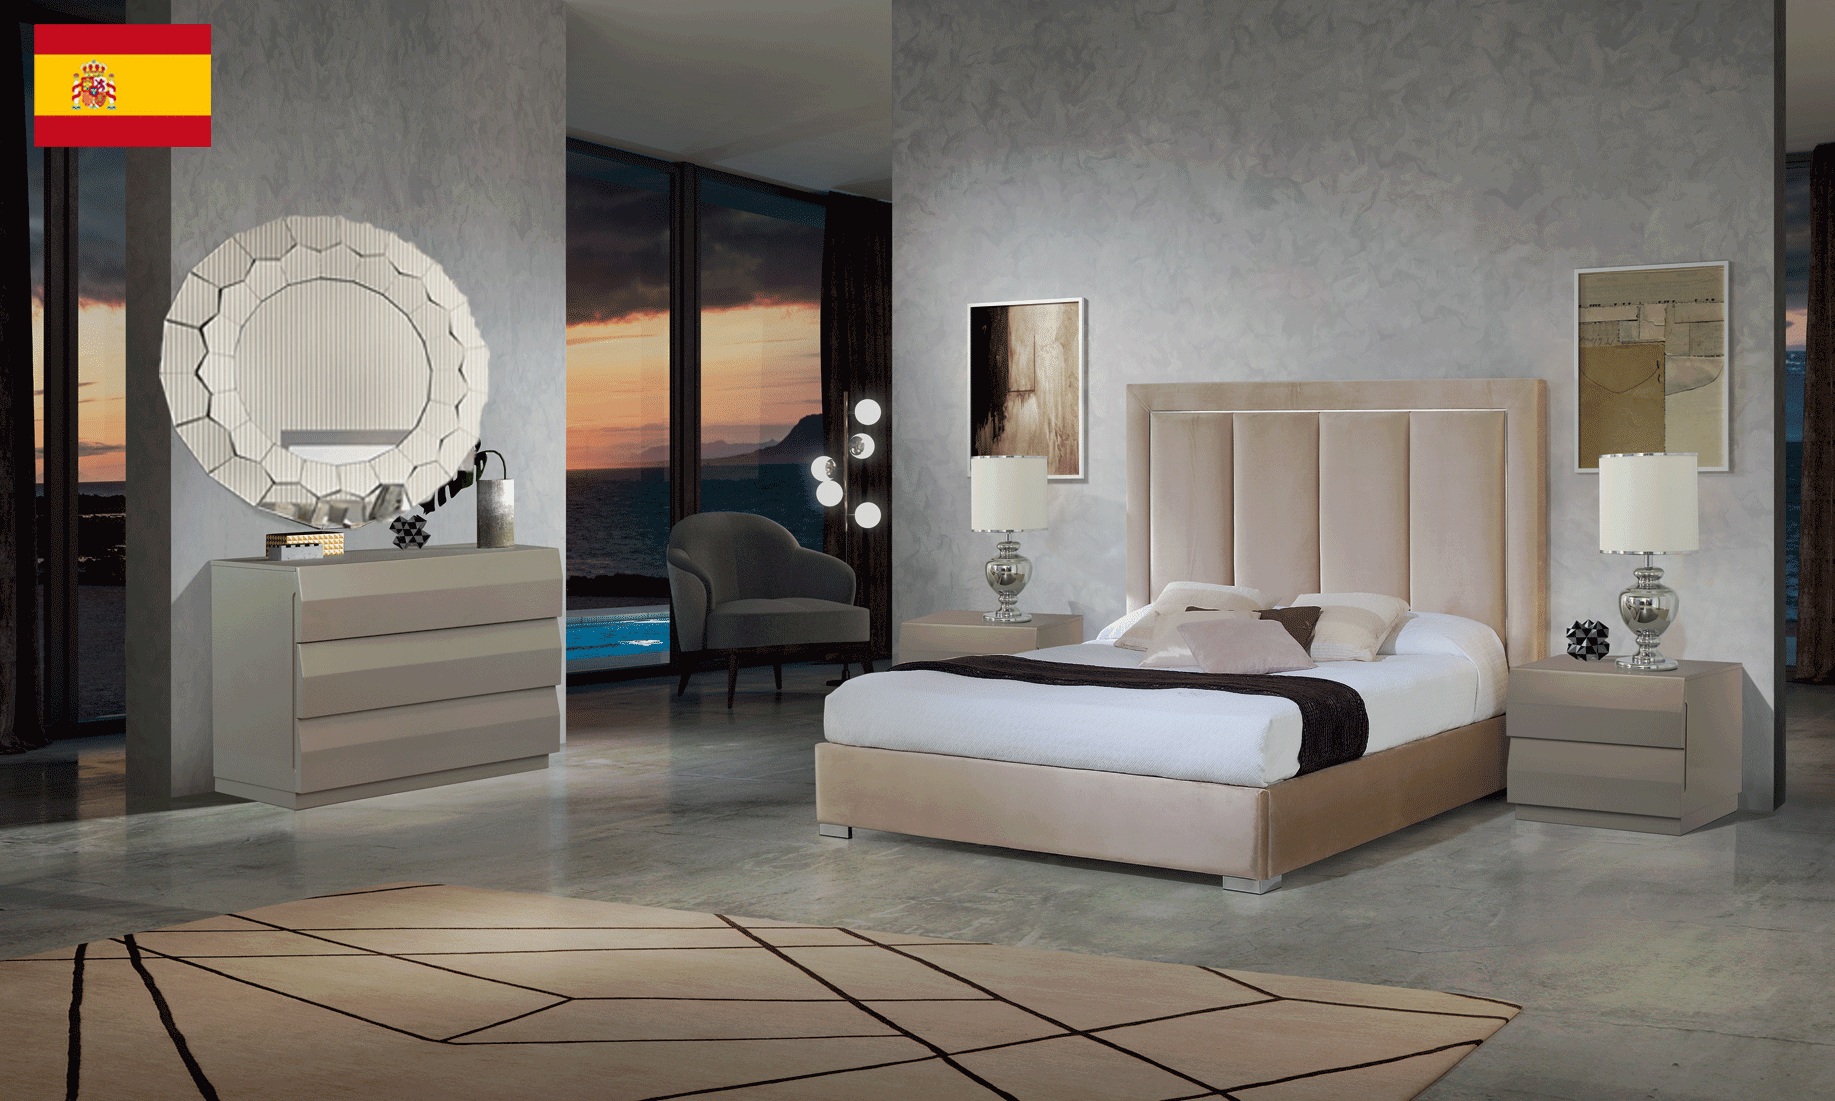 Bedroom Furniture Classic Bedrooms QS and KS Monica Bedroom with Storage, M152, C152, E115